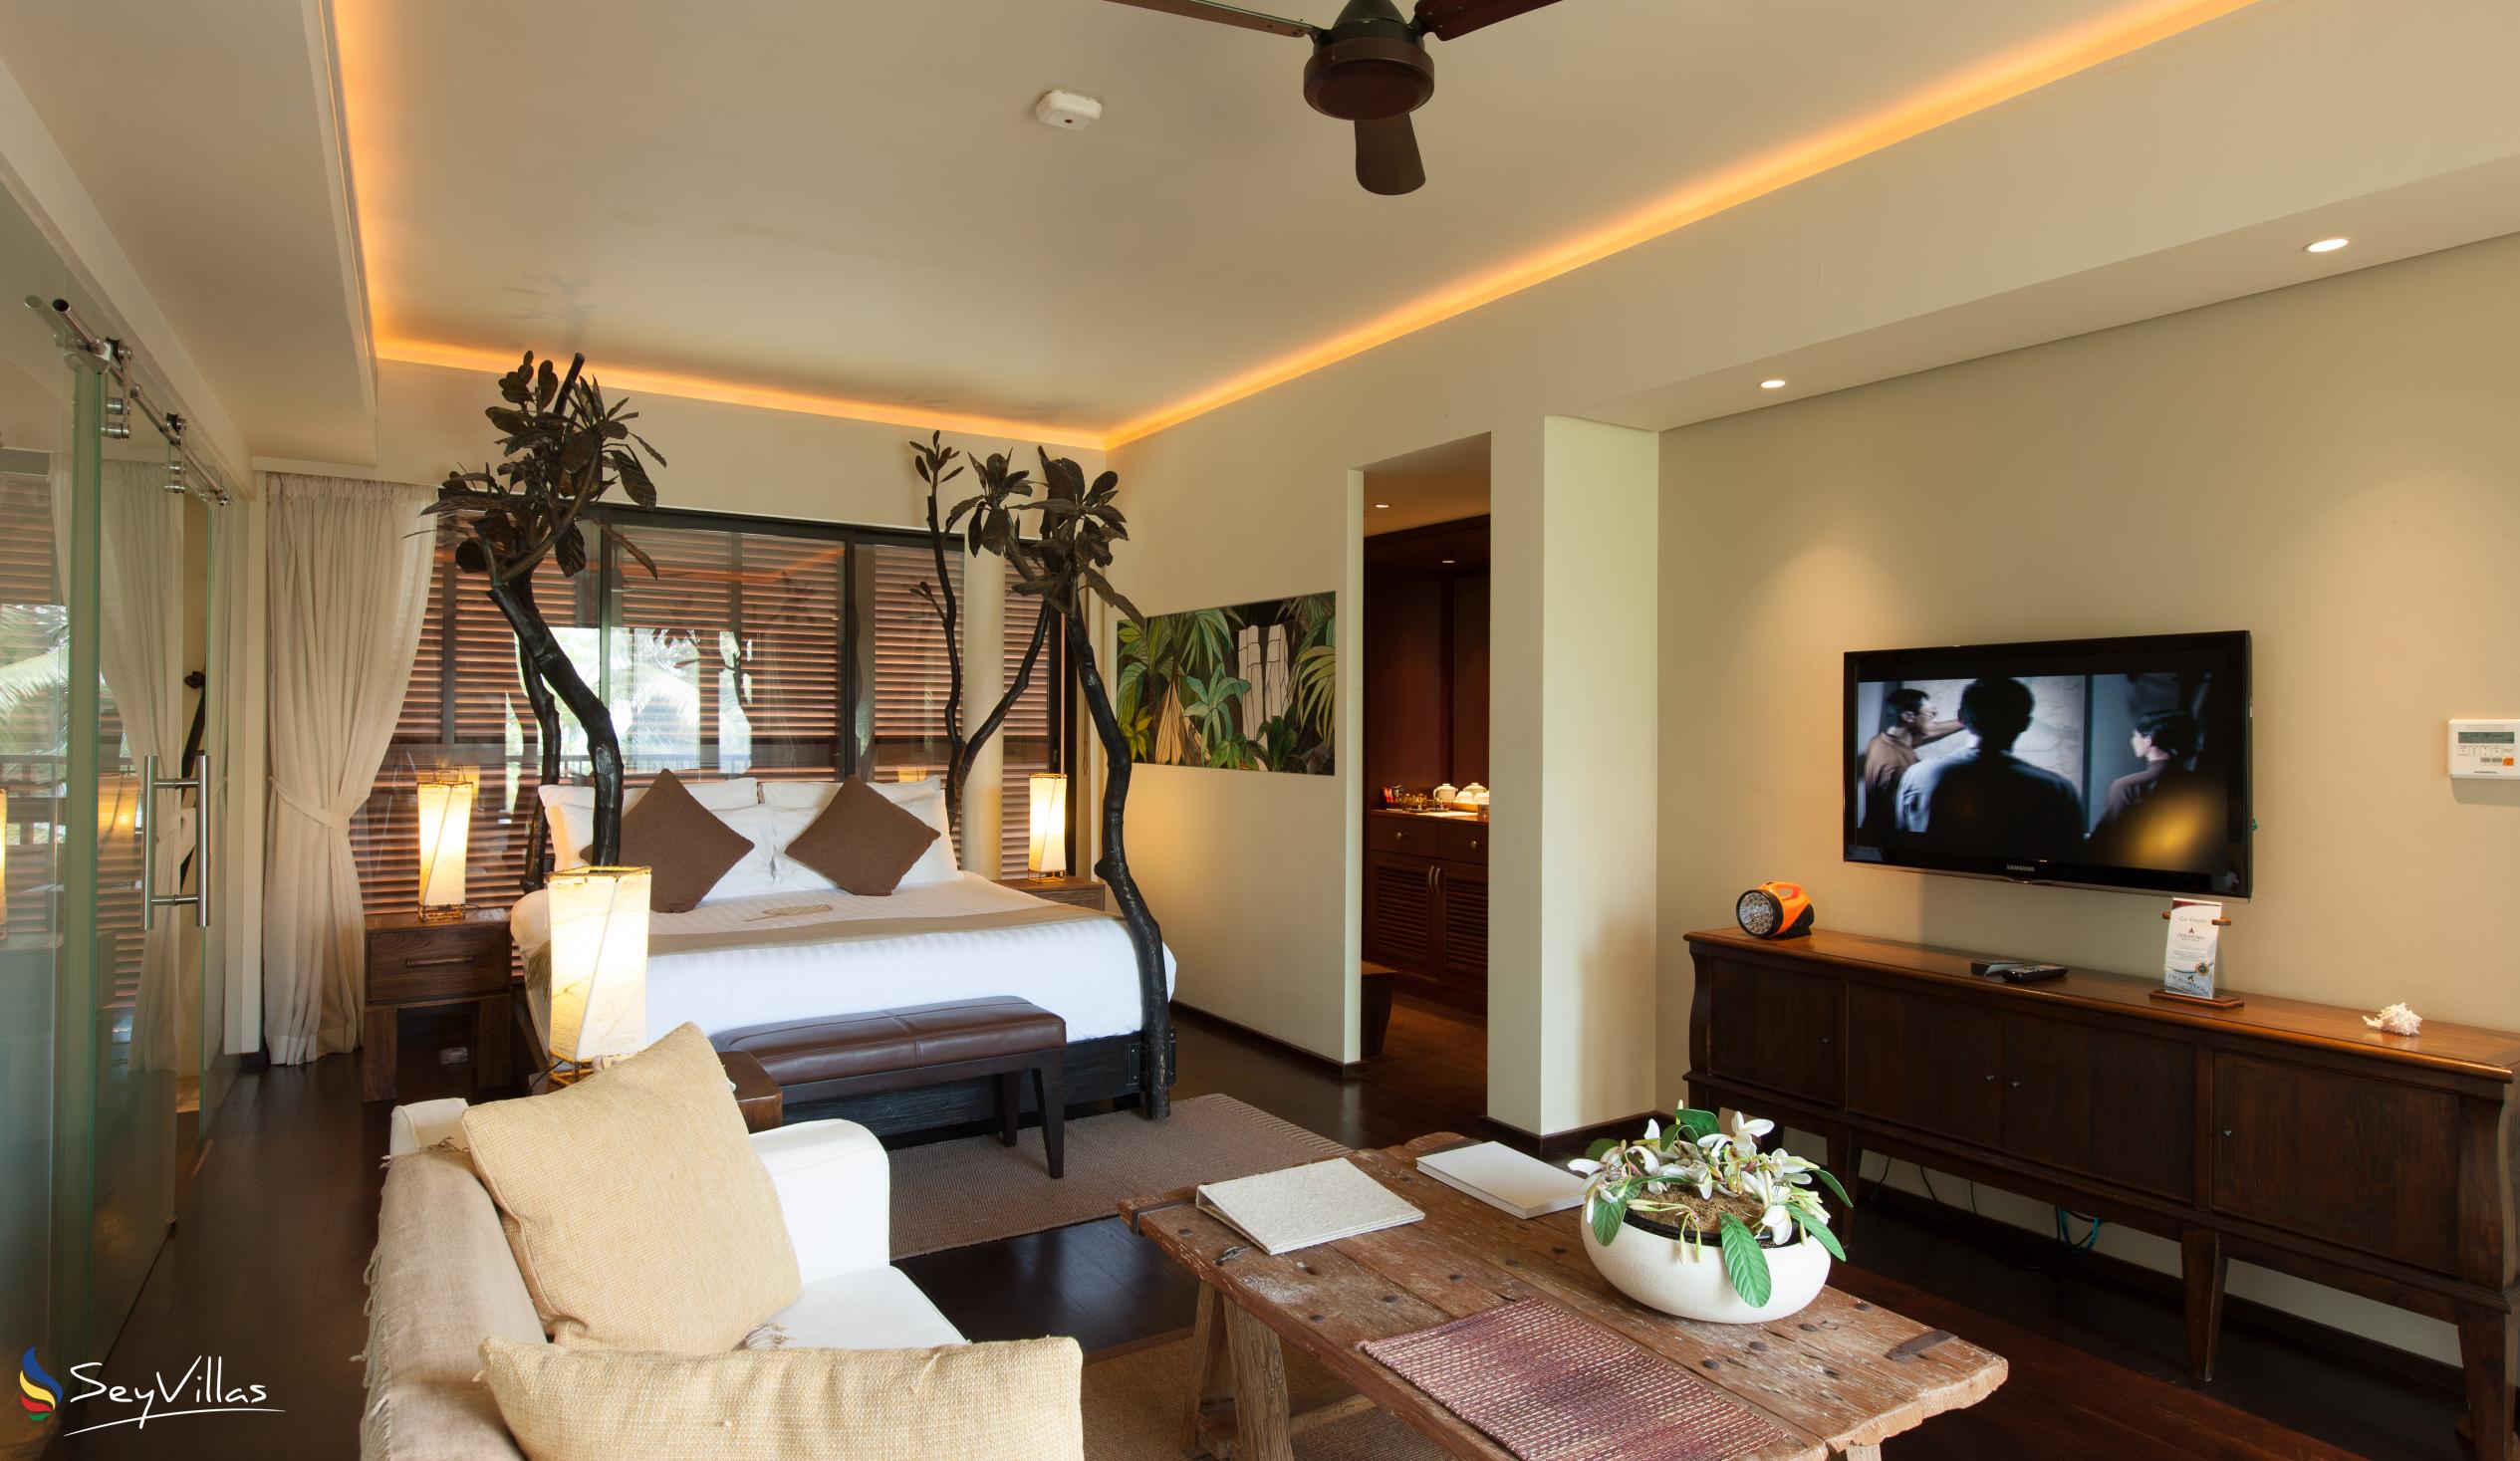 Photo 36: Dhevatara Beach Hotel - Sea View Suite with Kingsize Bed - Praslin (Seychelles)